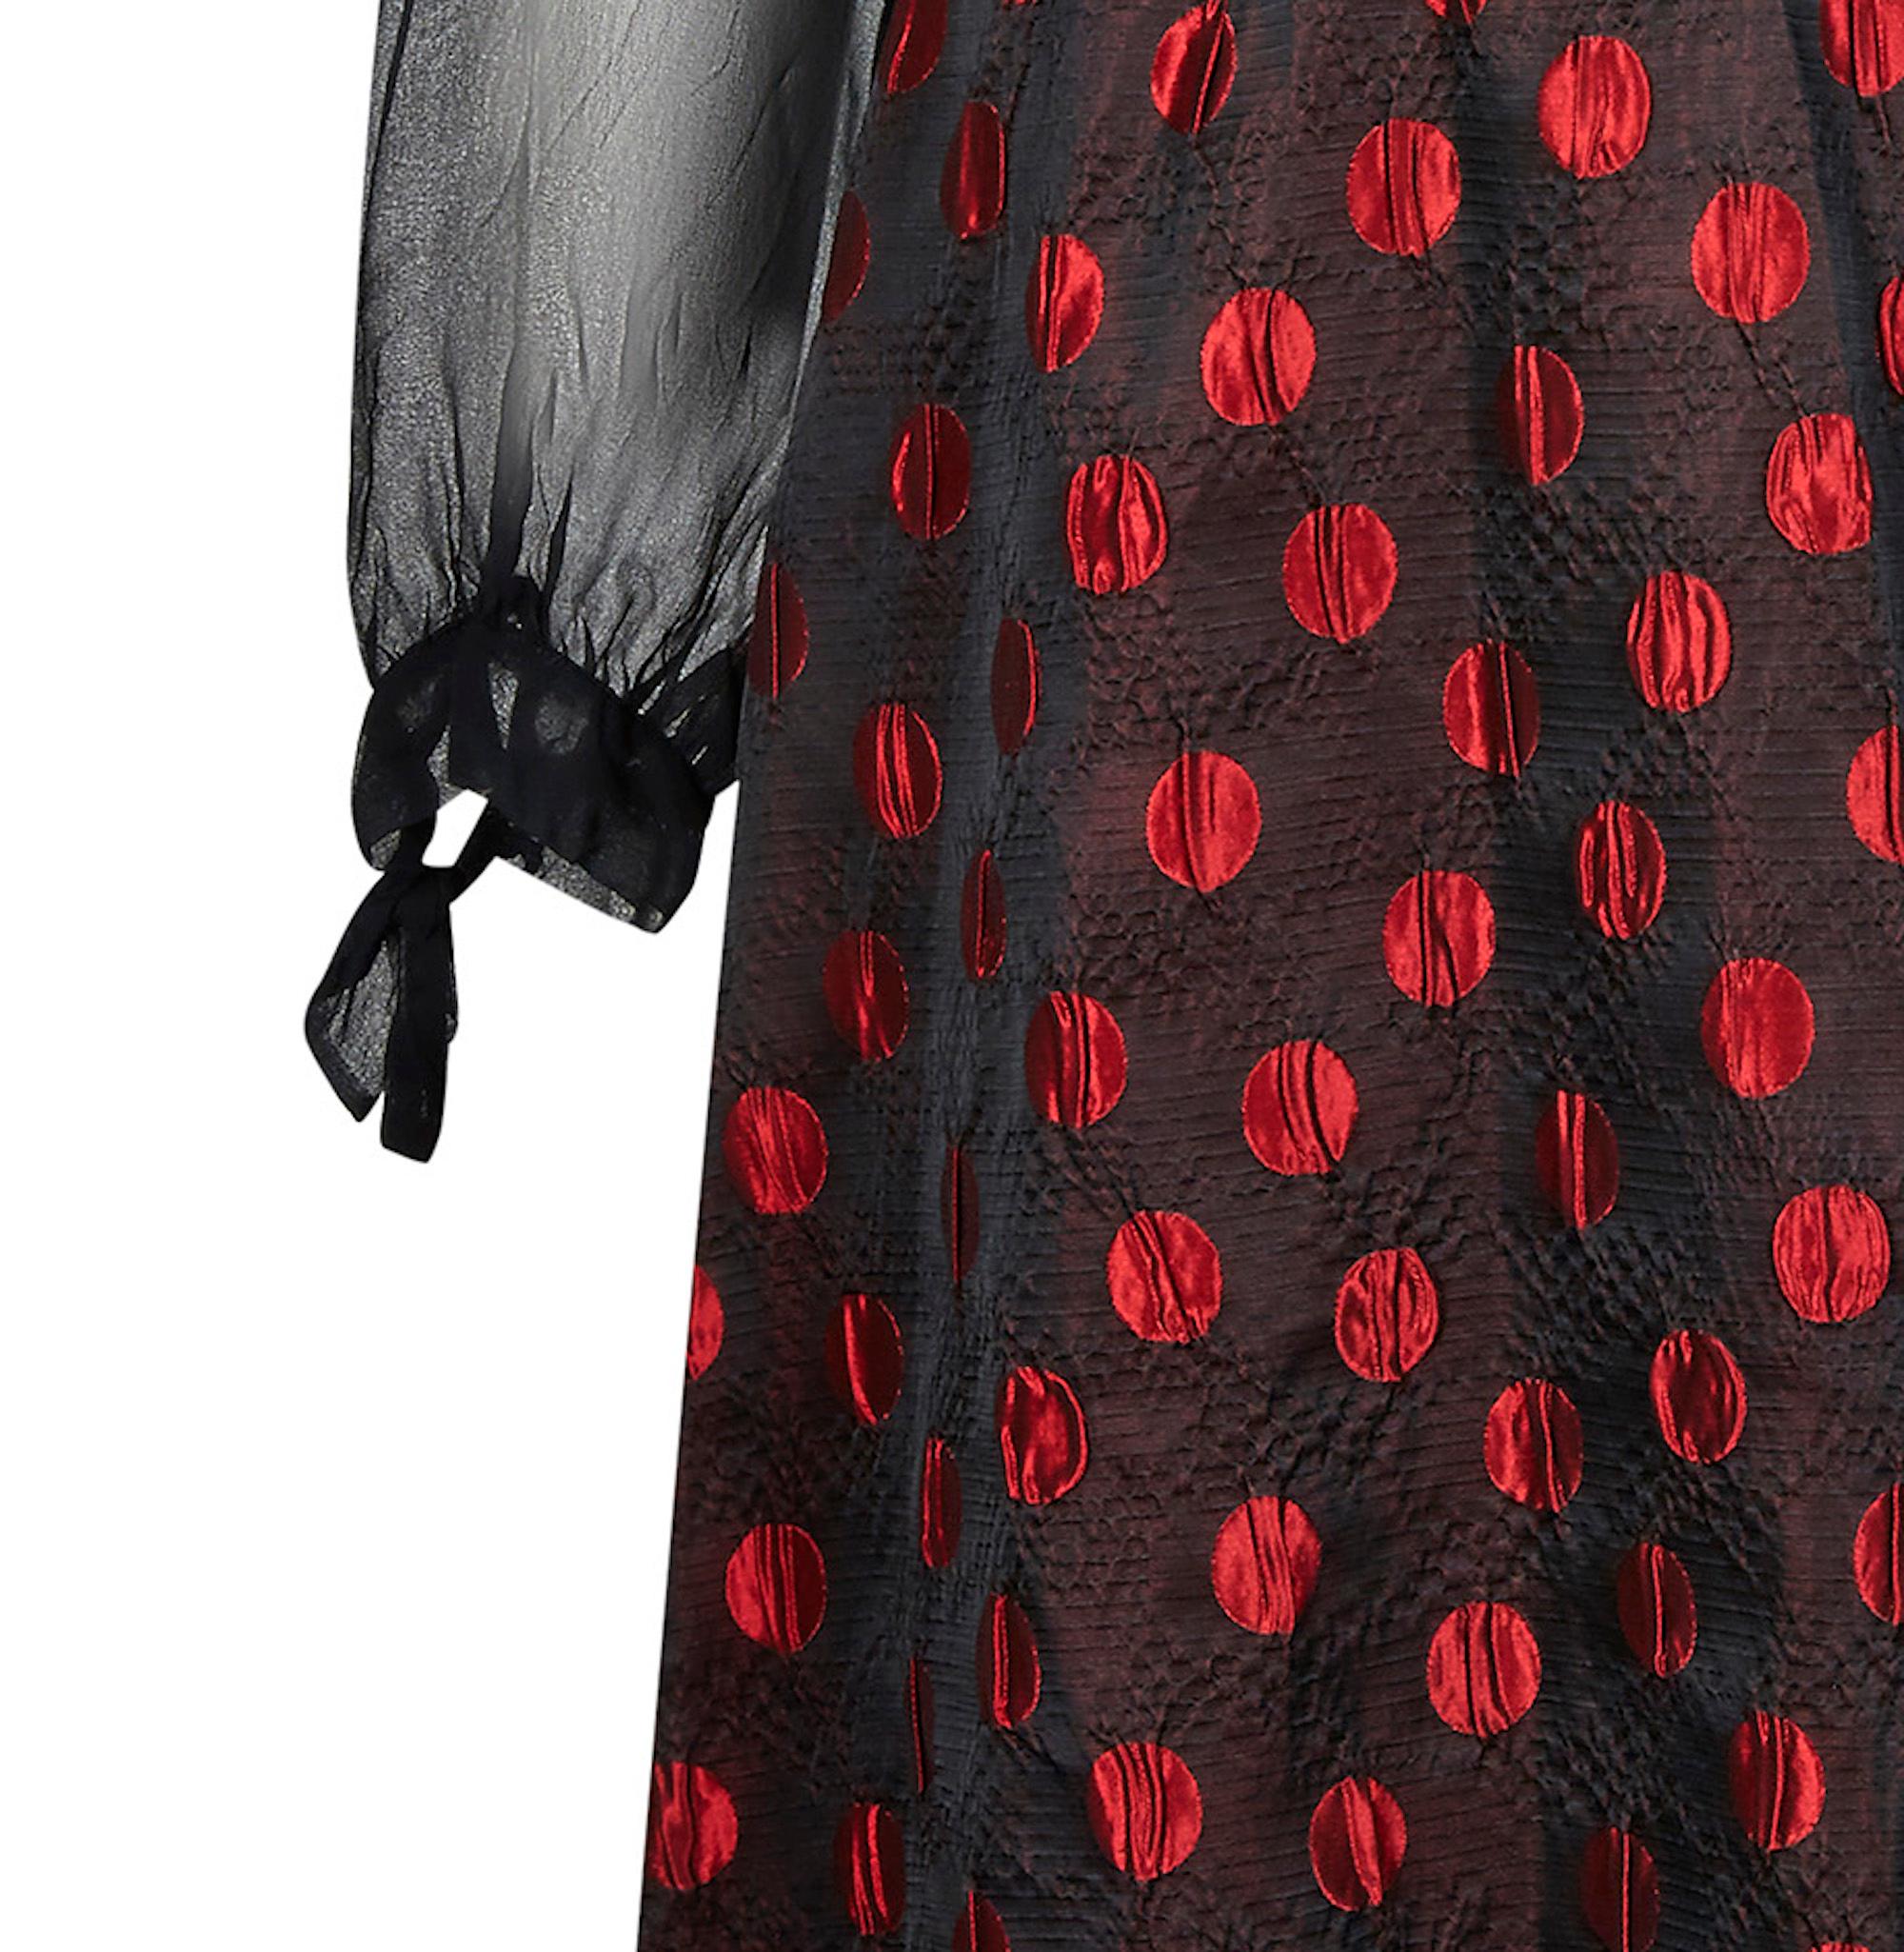 1960s Black and Red Polka Dot Demi Couture Dress and Jacket For Sale 2